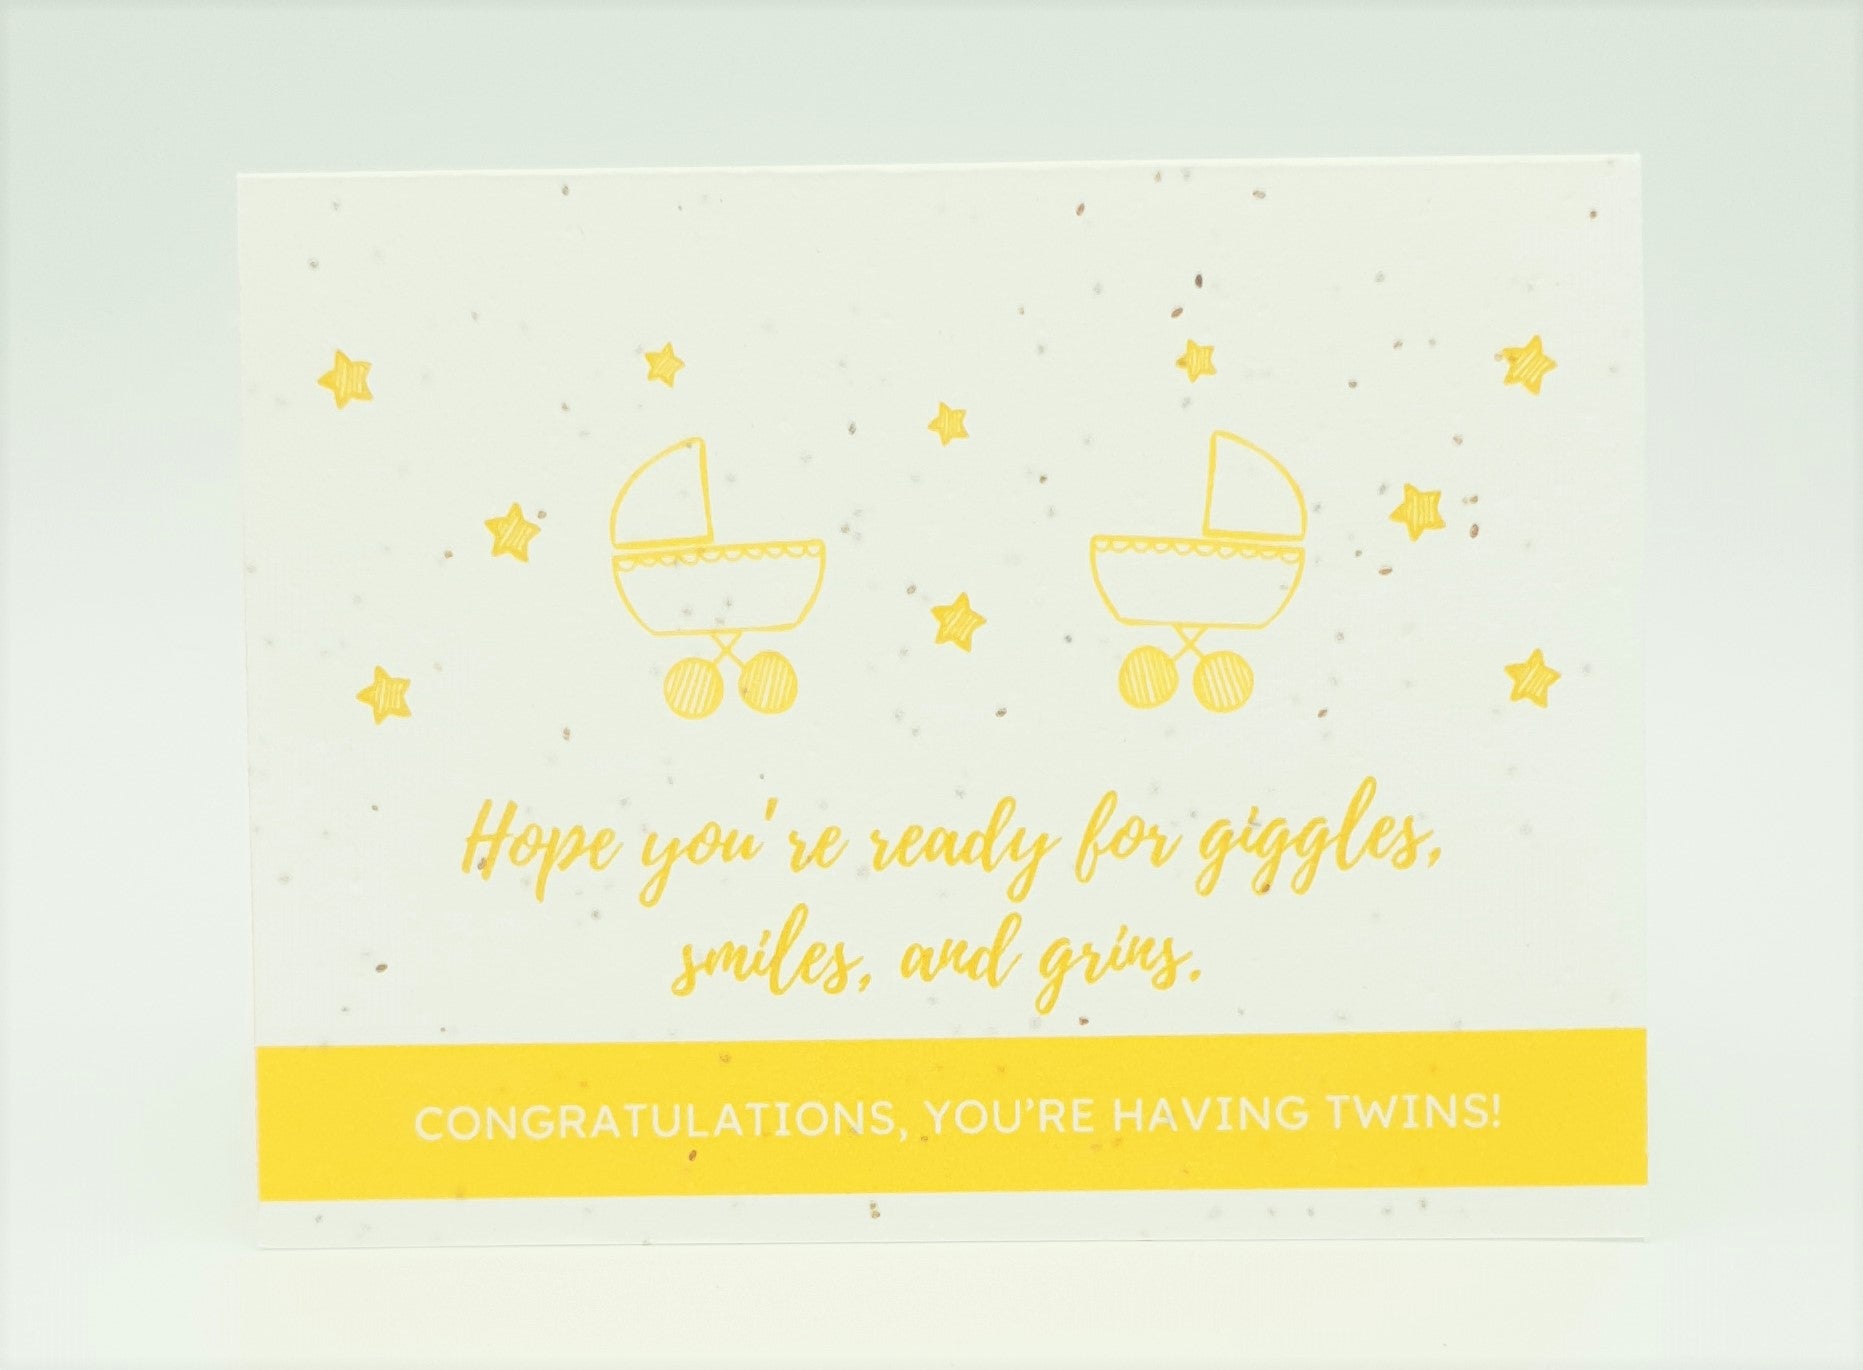 Plantable seed card with two yellow strollers and "Hope you're ready for giggles, smiles and grins.  Congratulations, you're having twins!"